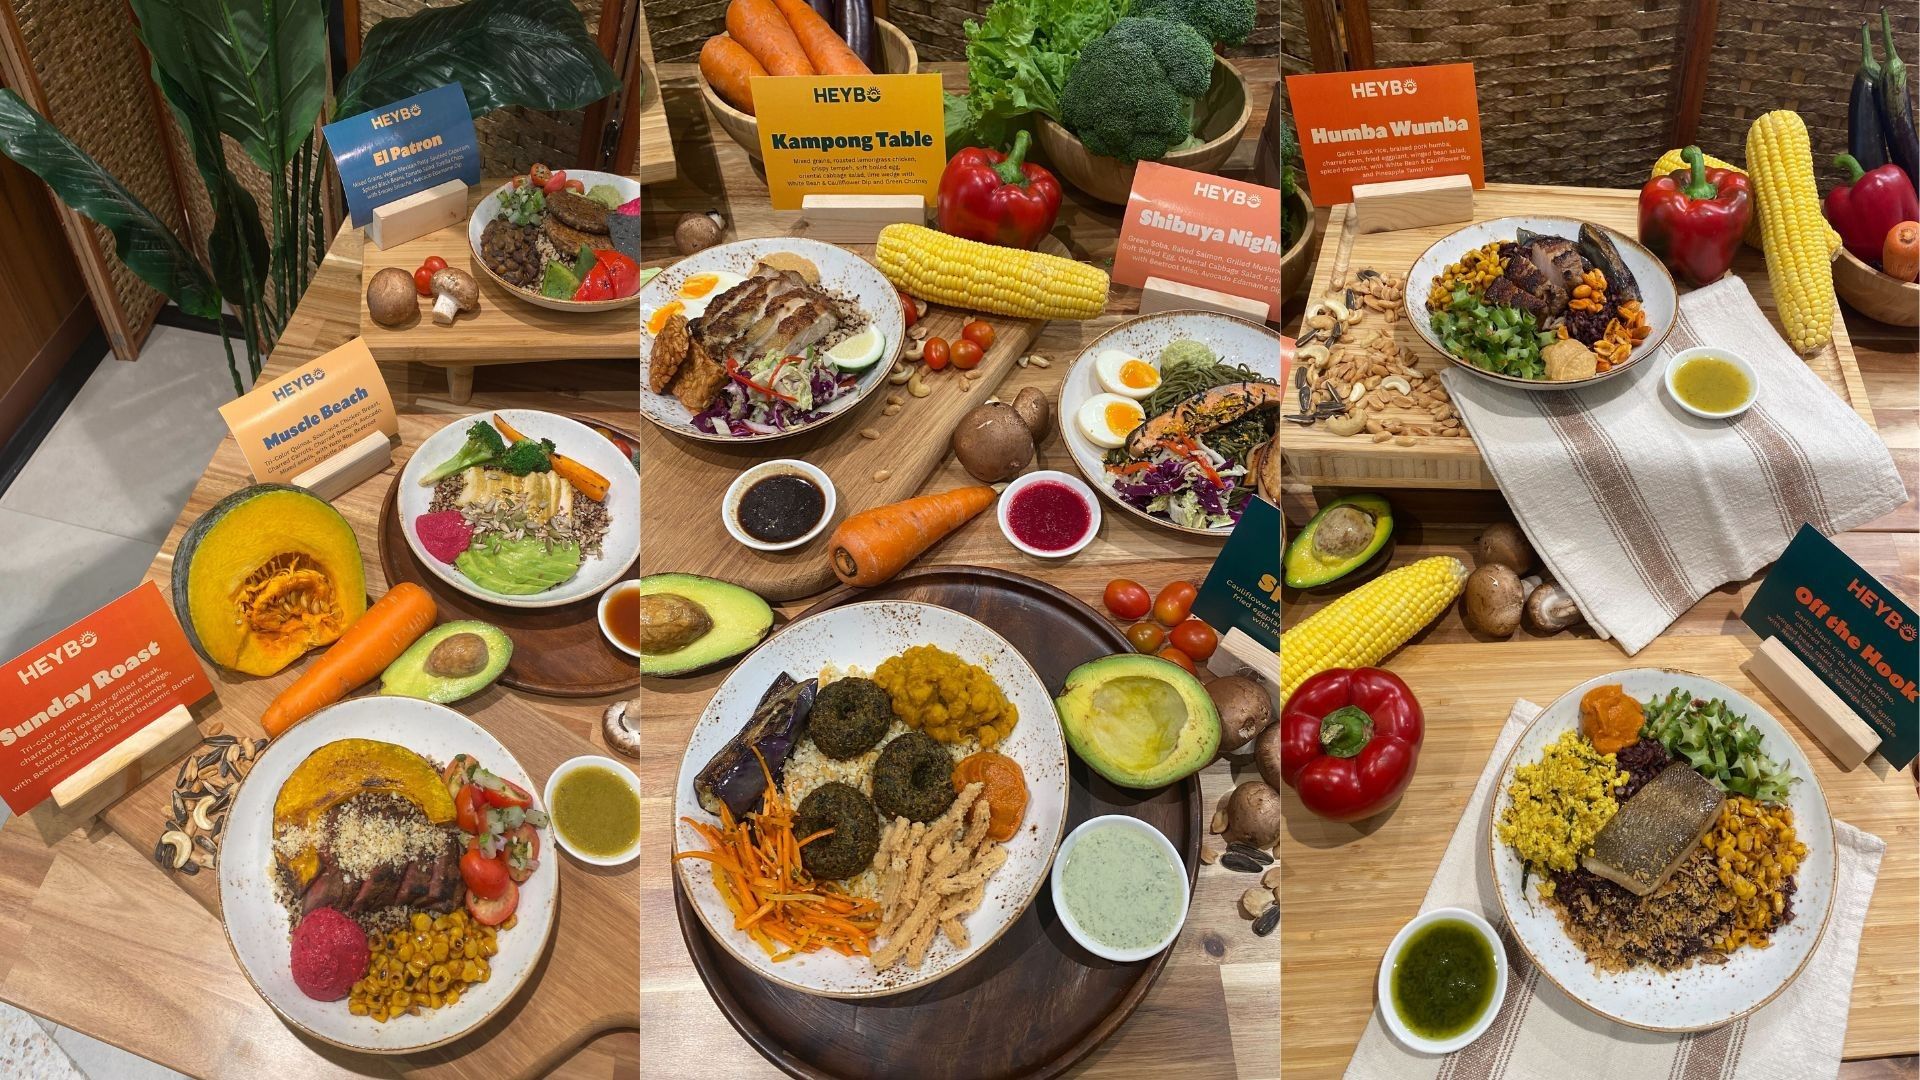 'Protein brother' of SaladStop! to open first branch in the Philippines